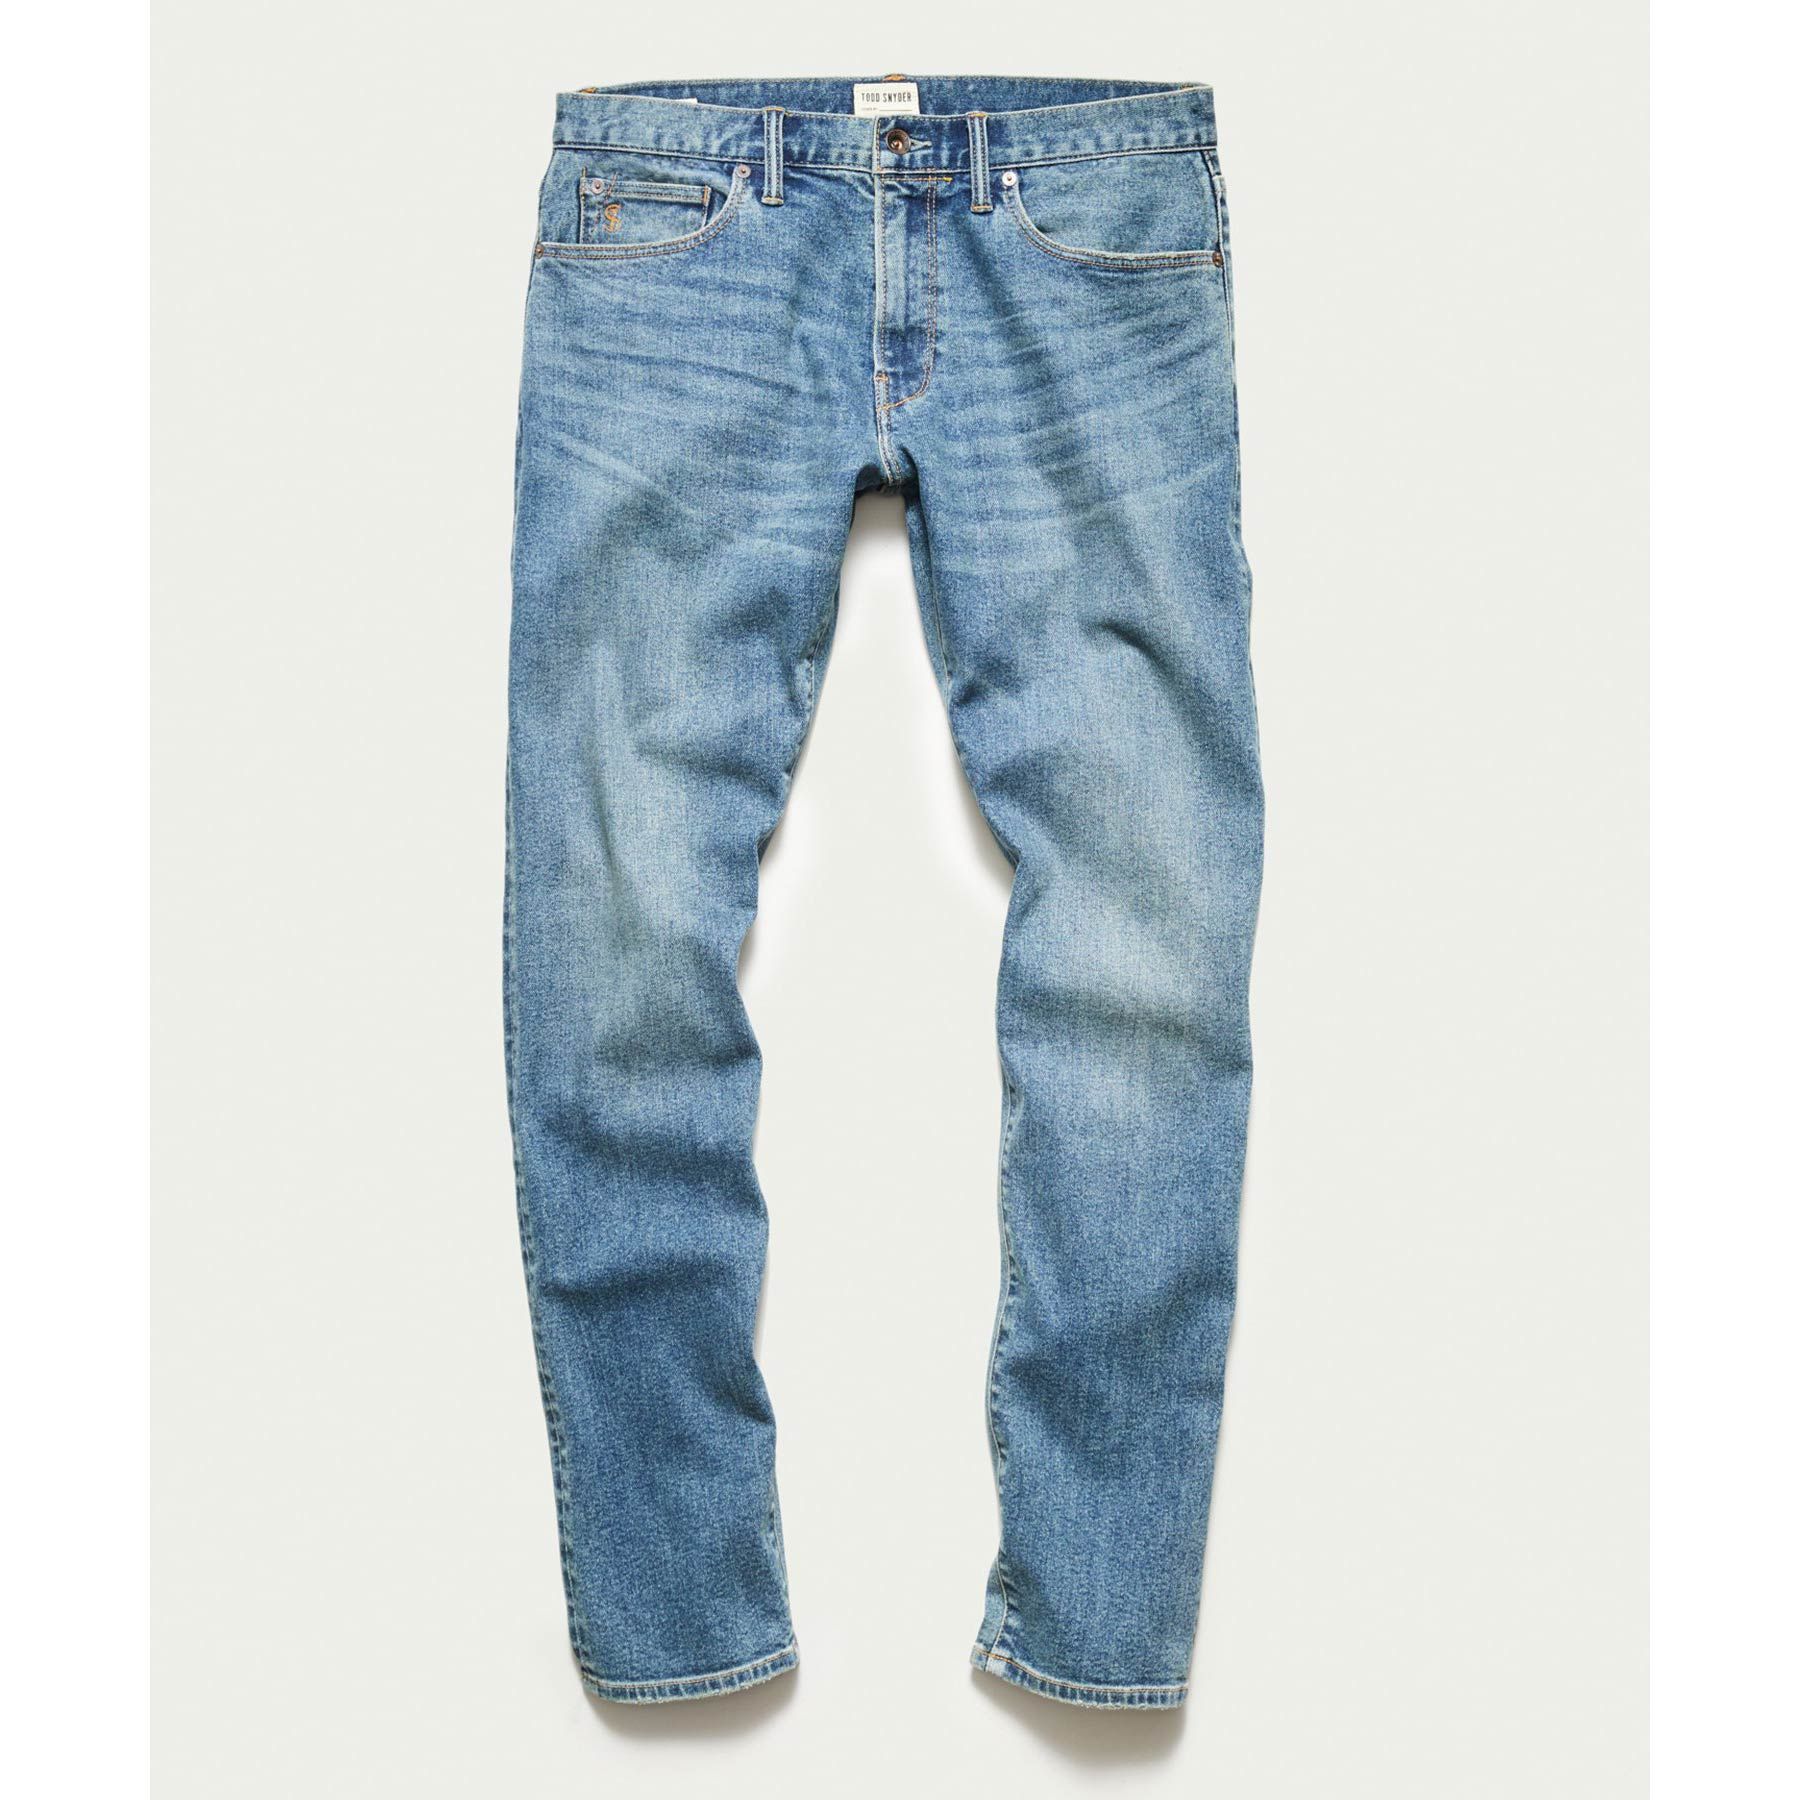 Men's Jeans | Urban Outfitters